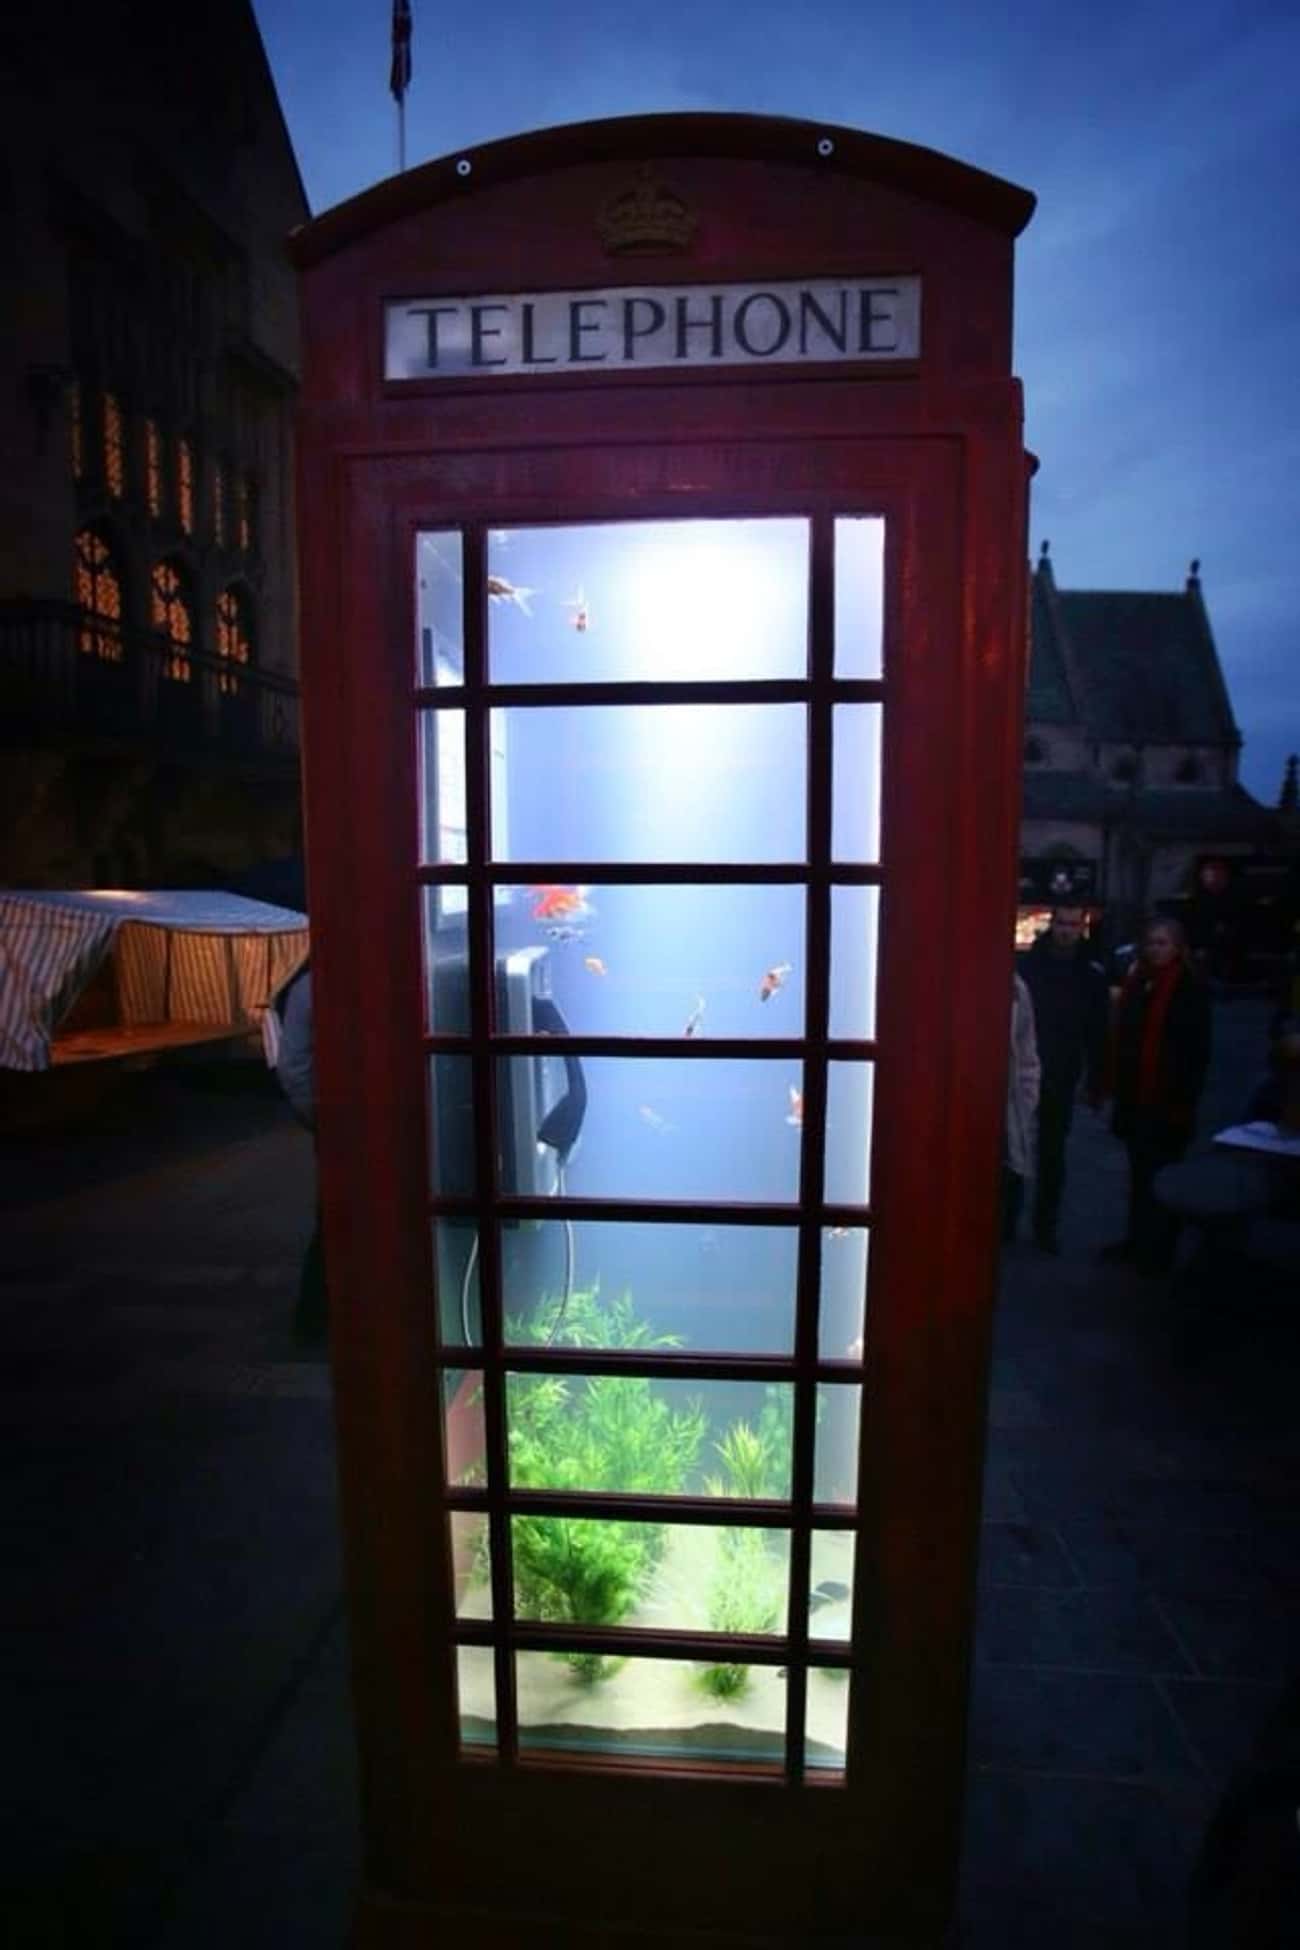 A Great Use for All those Obsolete Phone Booths in London